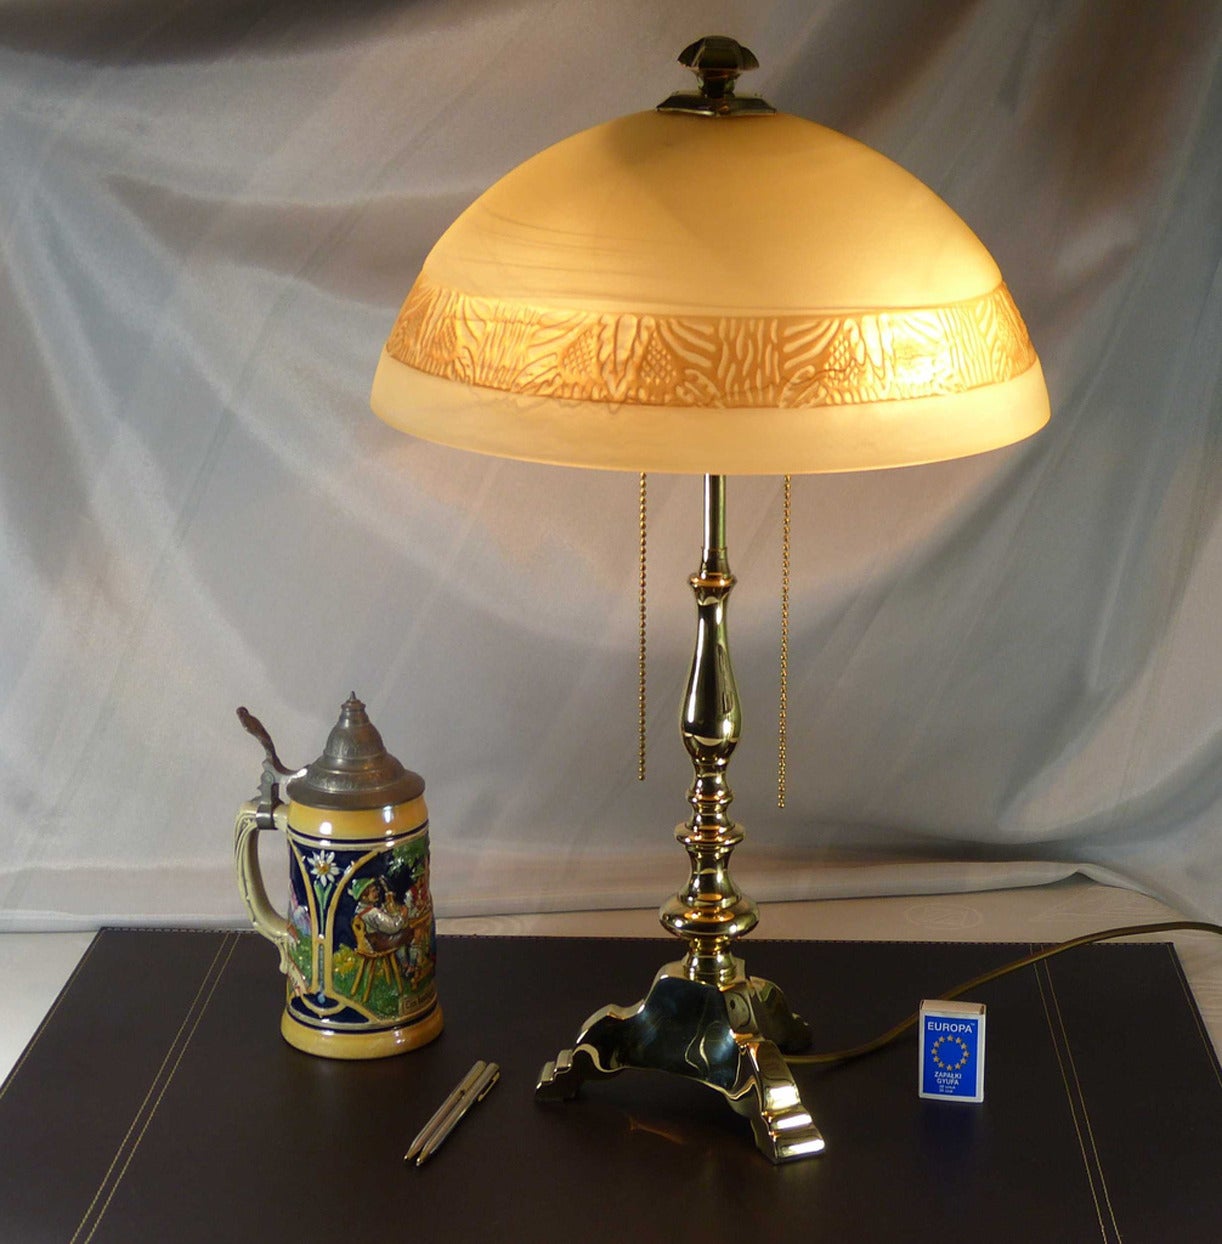 Brass table lamp from 1930s.
Beautiful tripod-shaped base of the horseshoe-shaped foot straps.
The core of the lamp with a round shape integrated into the base of the lamp.
Original lamp after renovation ...
Old lamp after a small renovation.